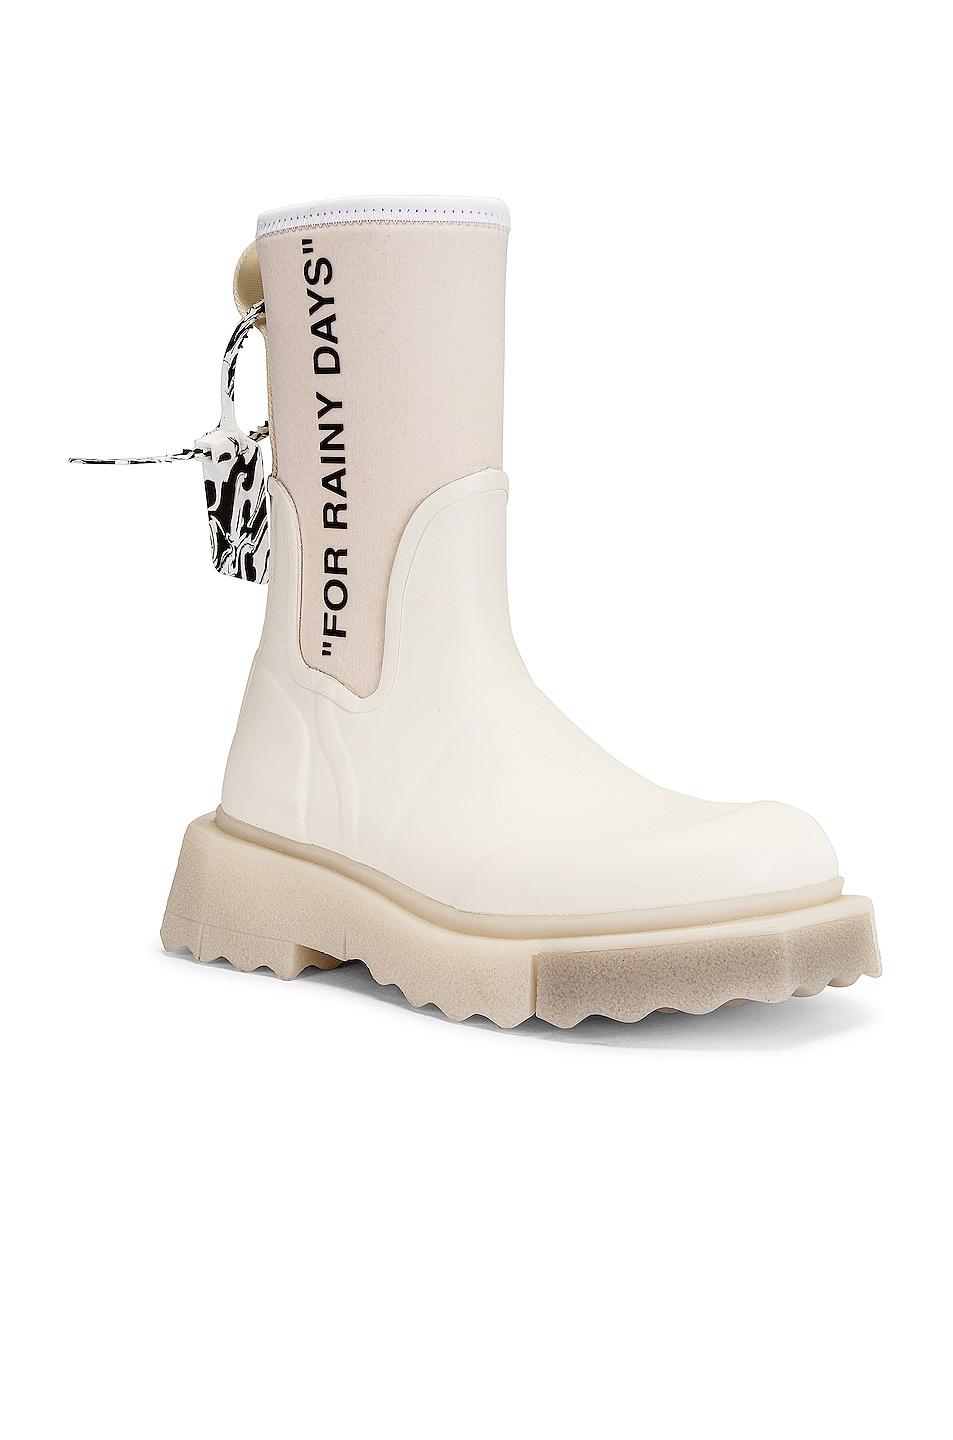 Off-White c/o Virgil Abloh For Rainy Days Rubber Boot in White | Lyst